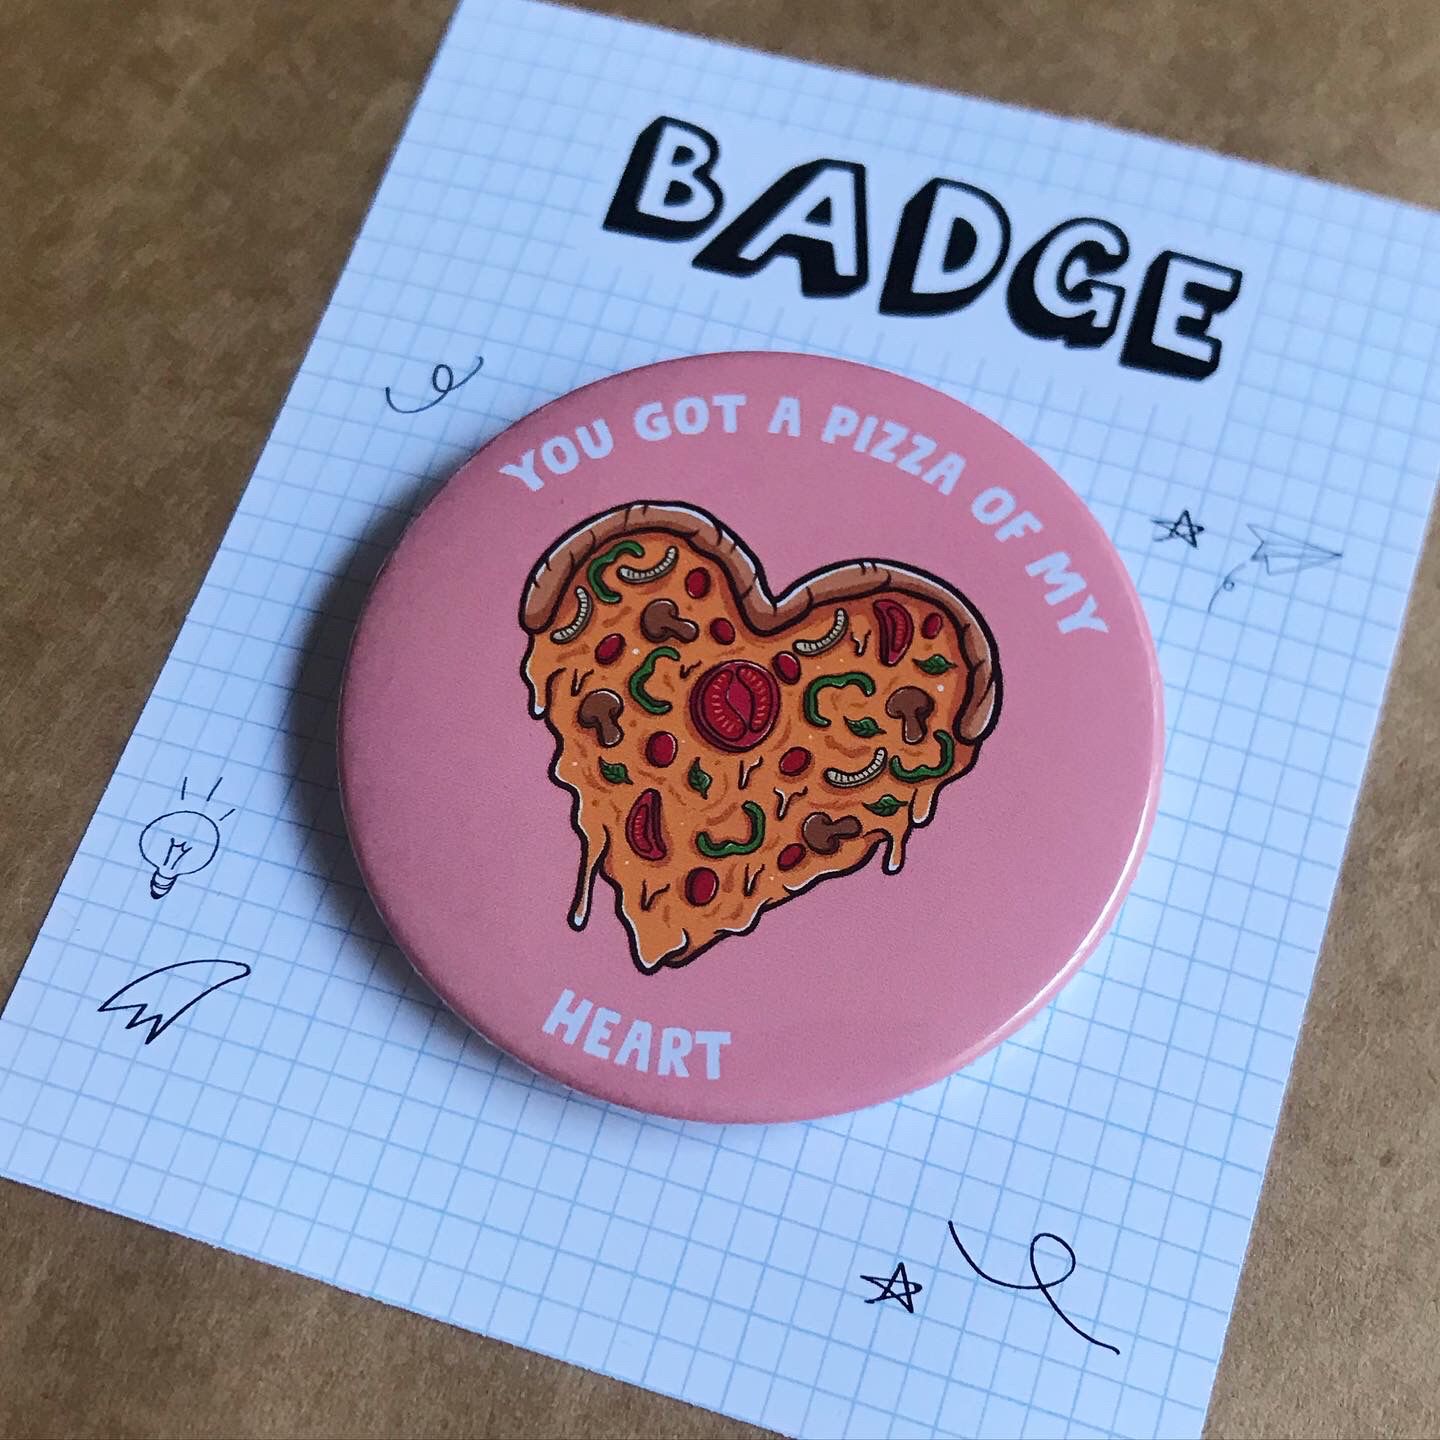 You got a pizza of my heart Badge